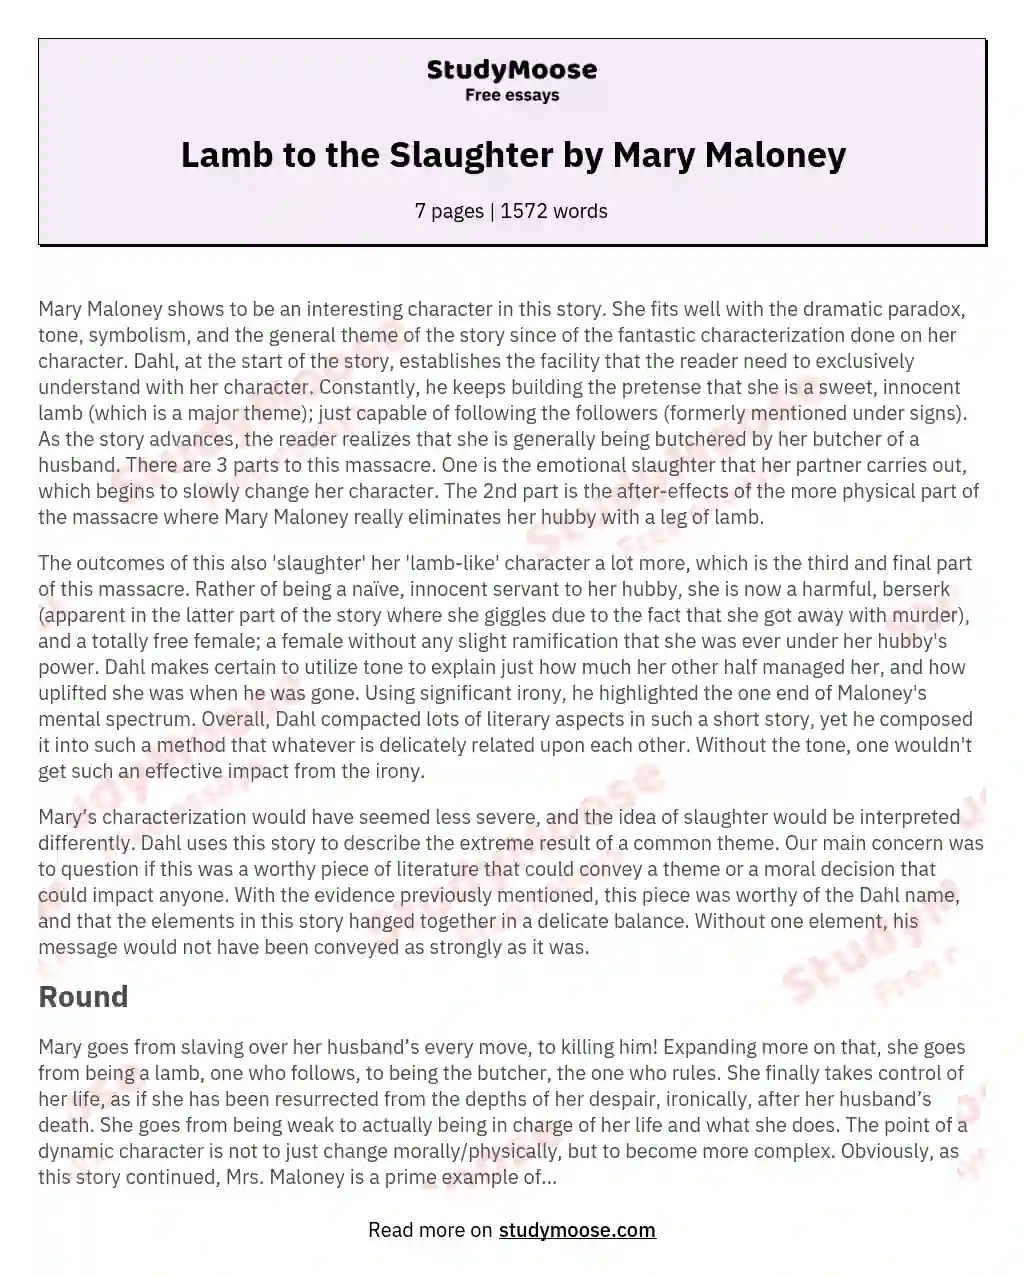 Lamb to the Slaughter by Mary Maloney